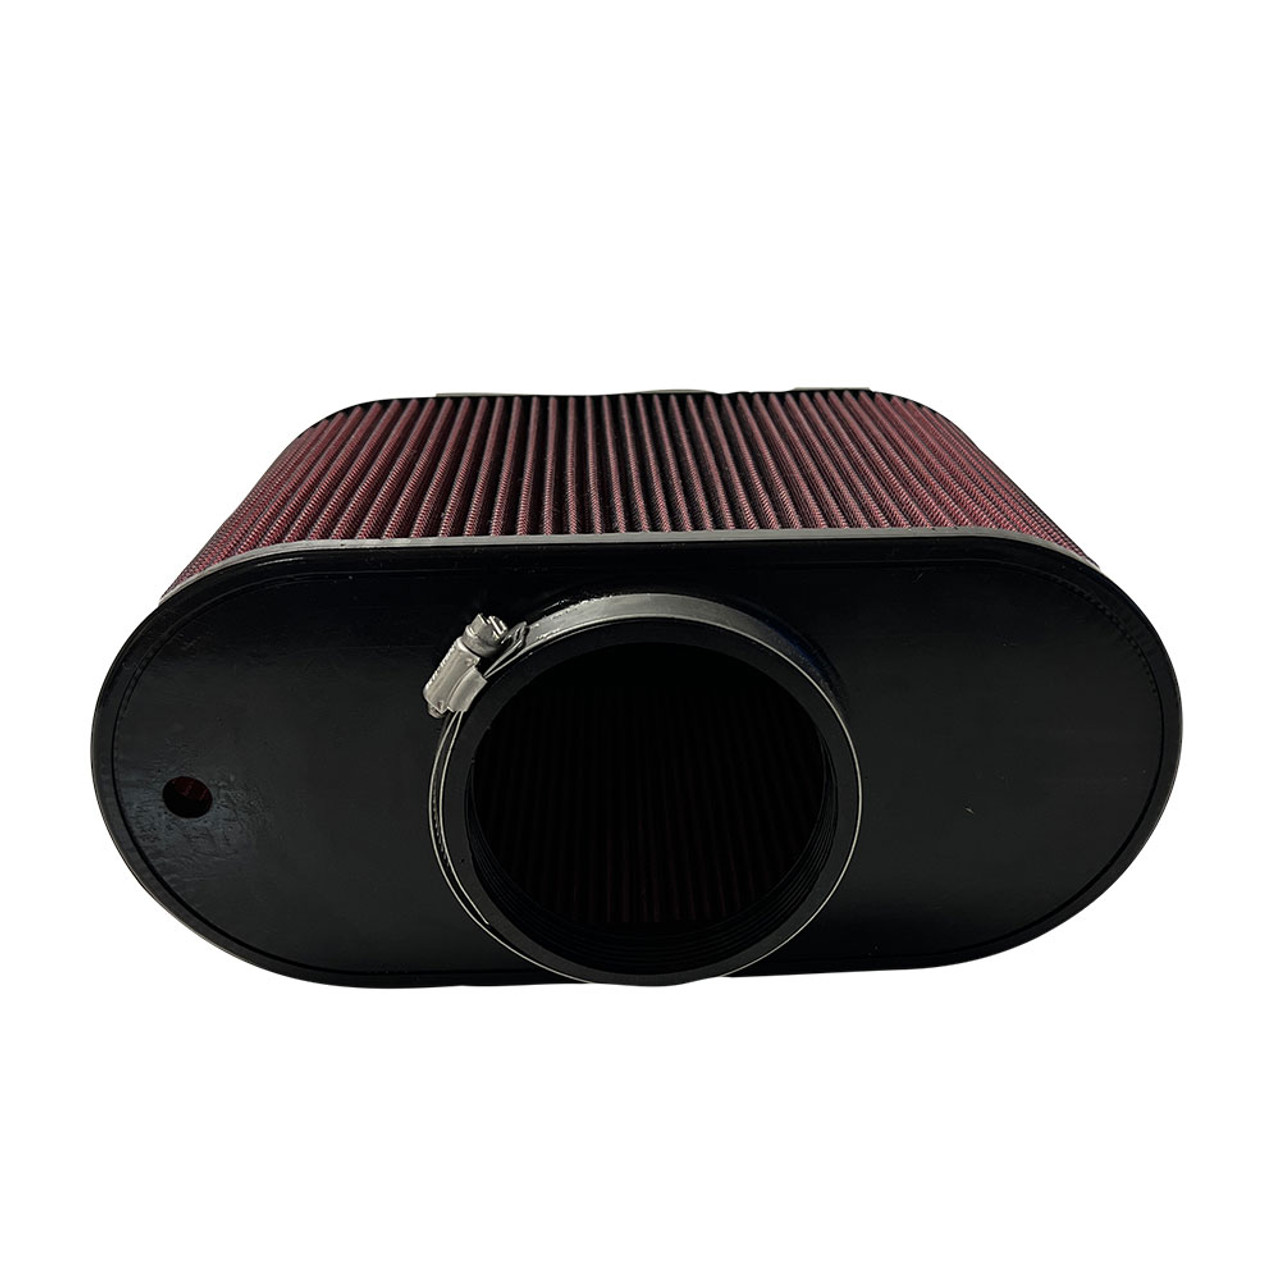 S & B Air Filter 4x12 Inch Oval - Red Oil With and Without hole